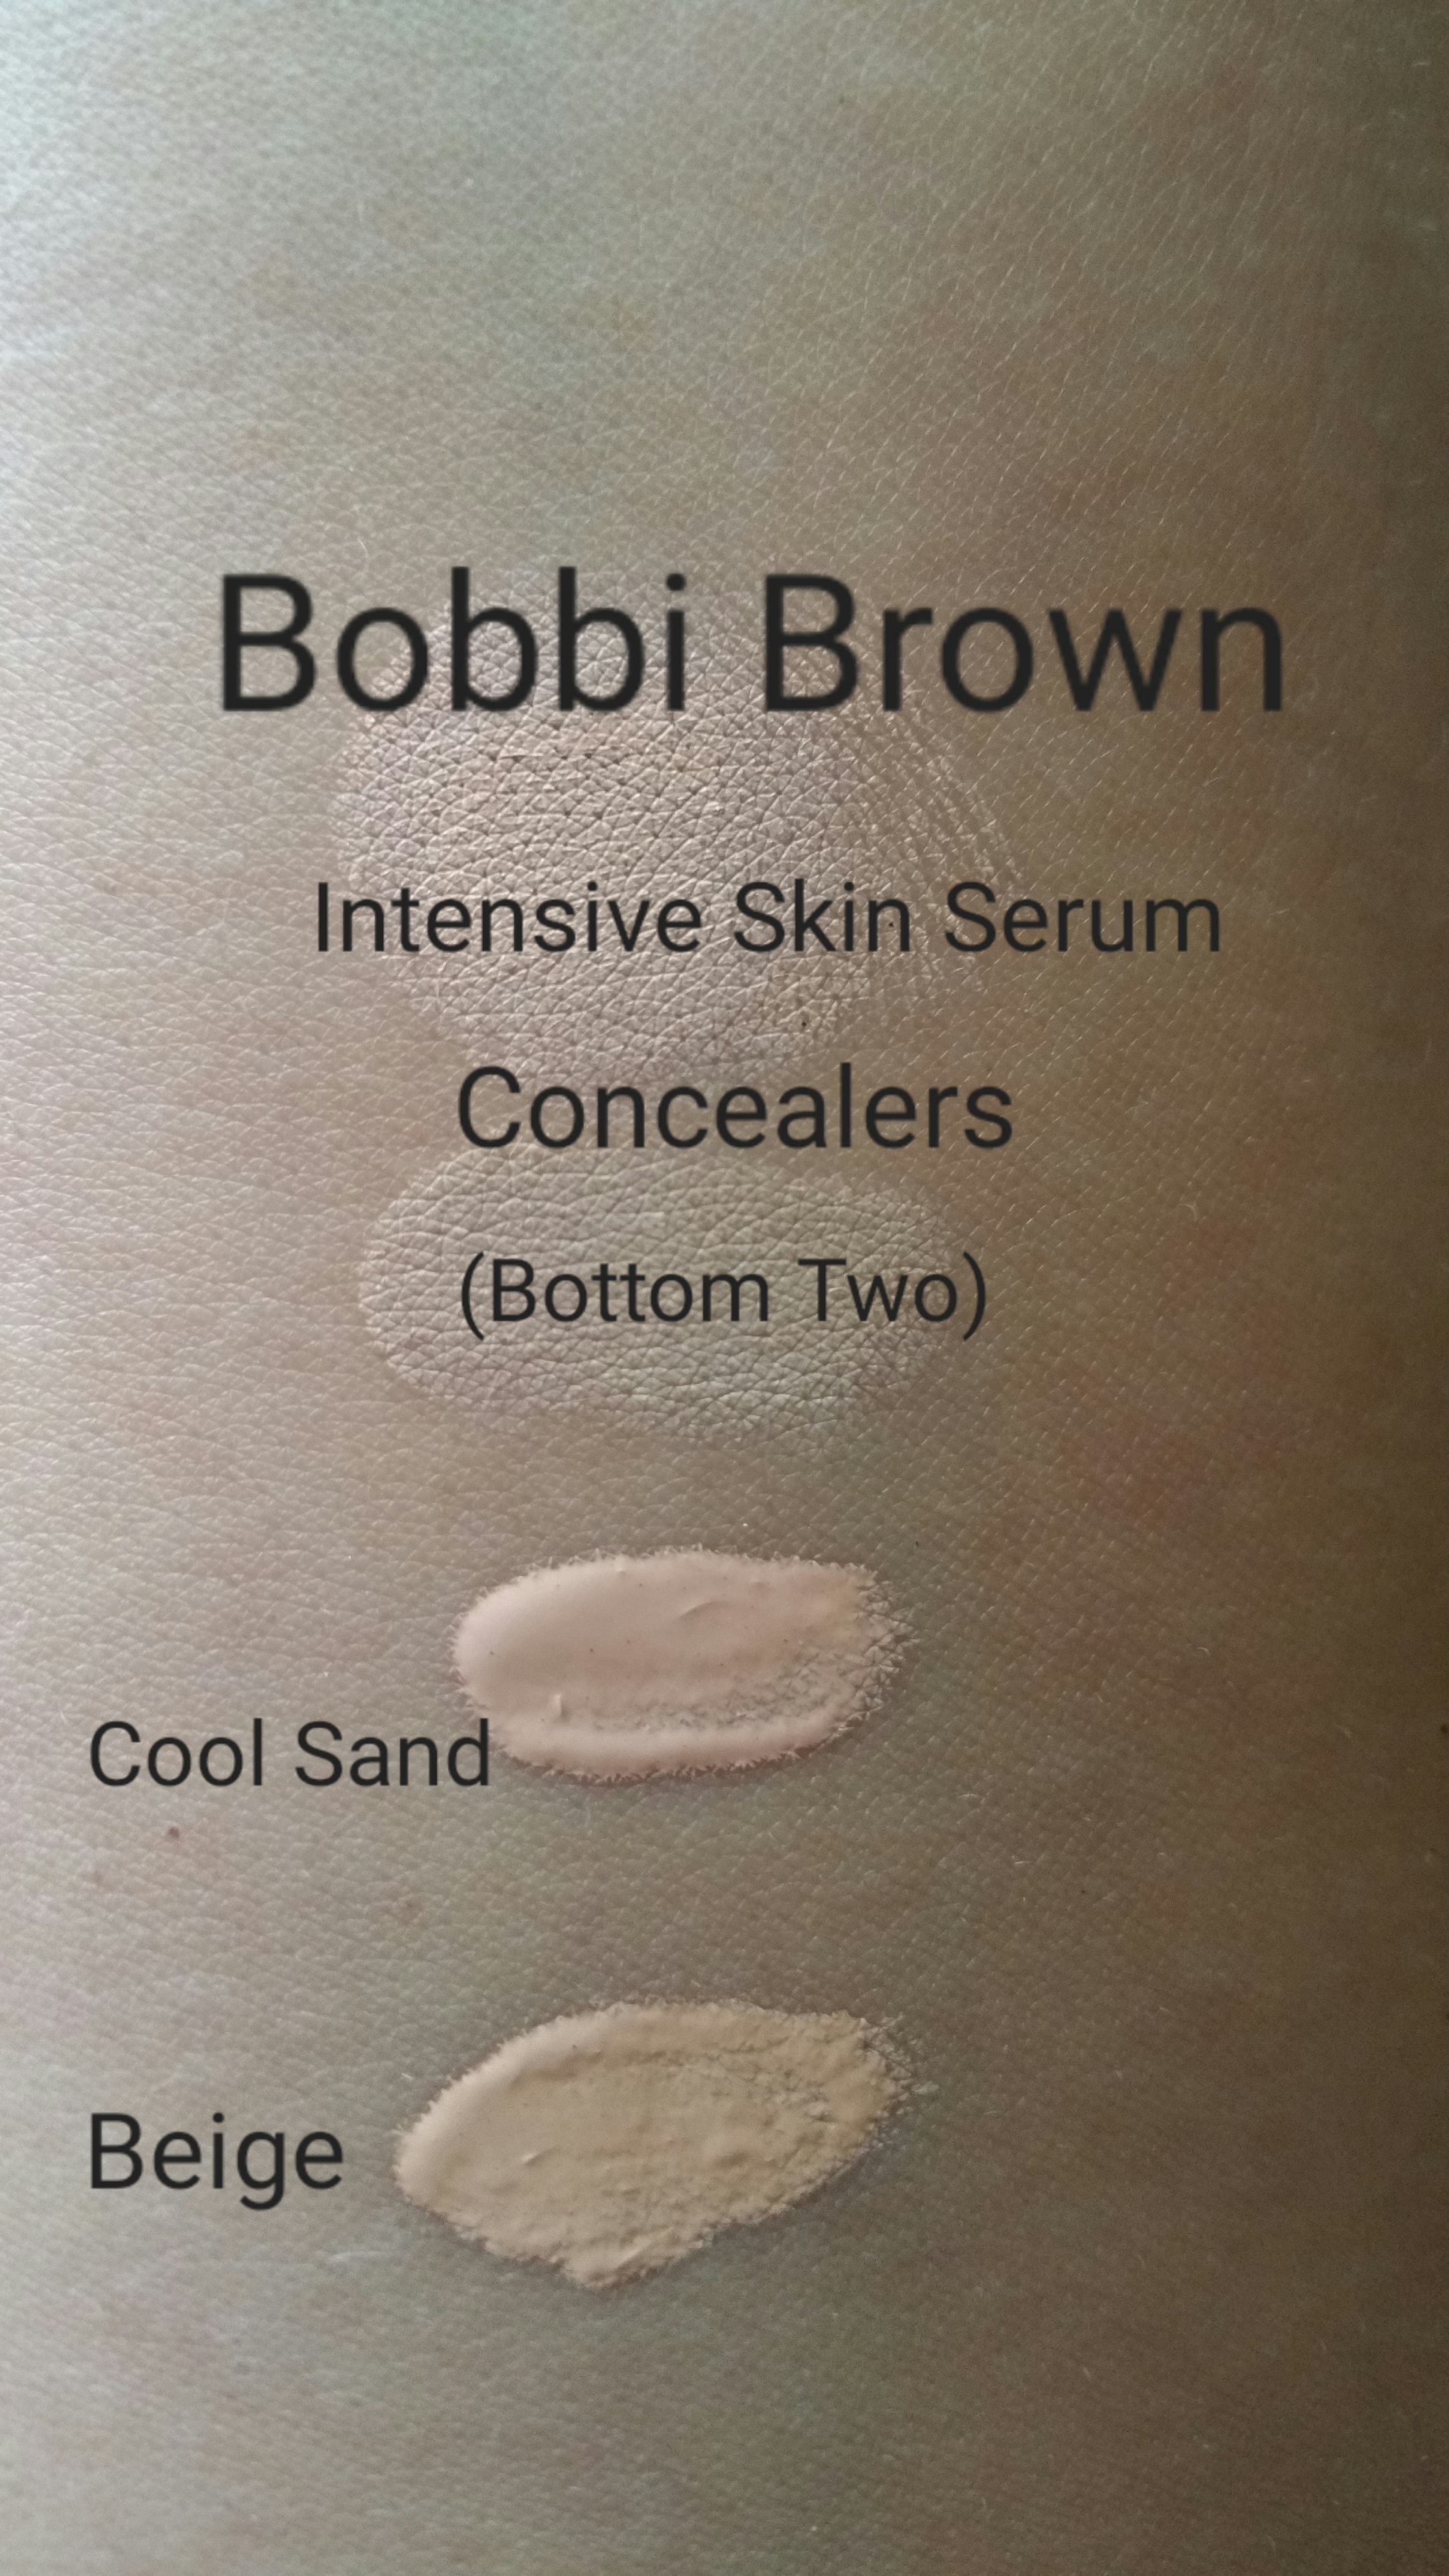 Bobbi Brown Creamy Concealer, Intensive Skin Serum and Stick Foundation: Swatches, and Contrast cosmetichaulic.com